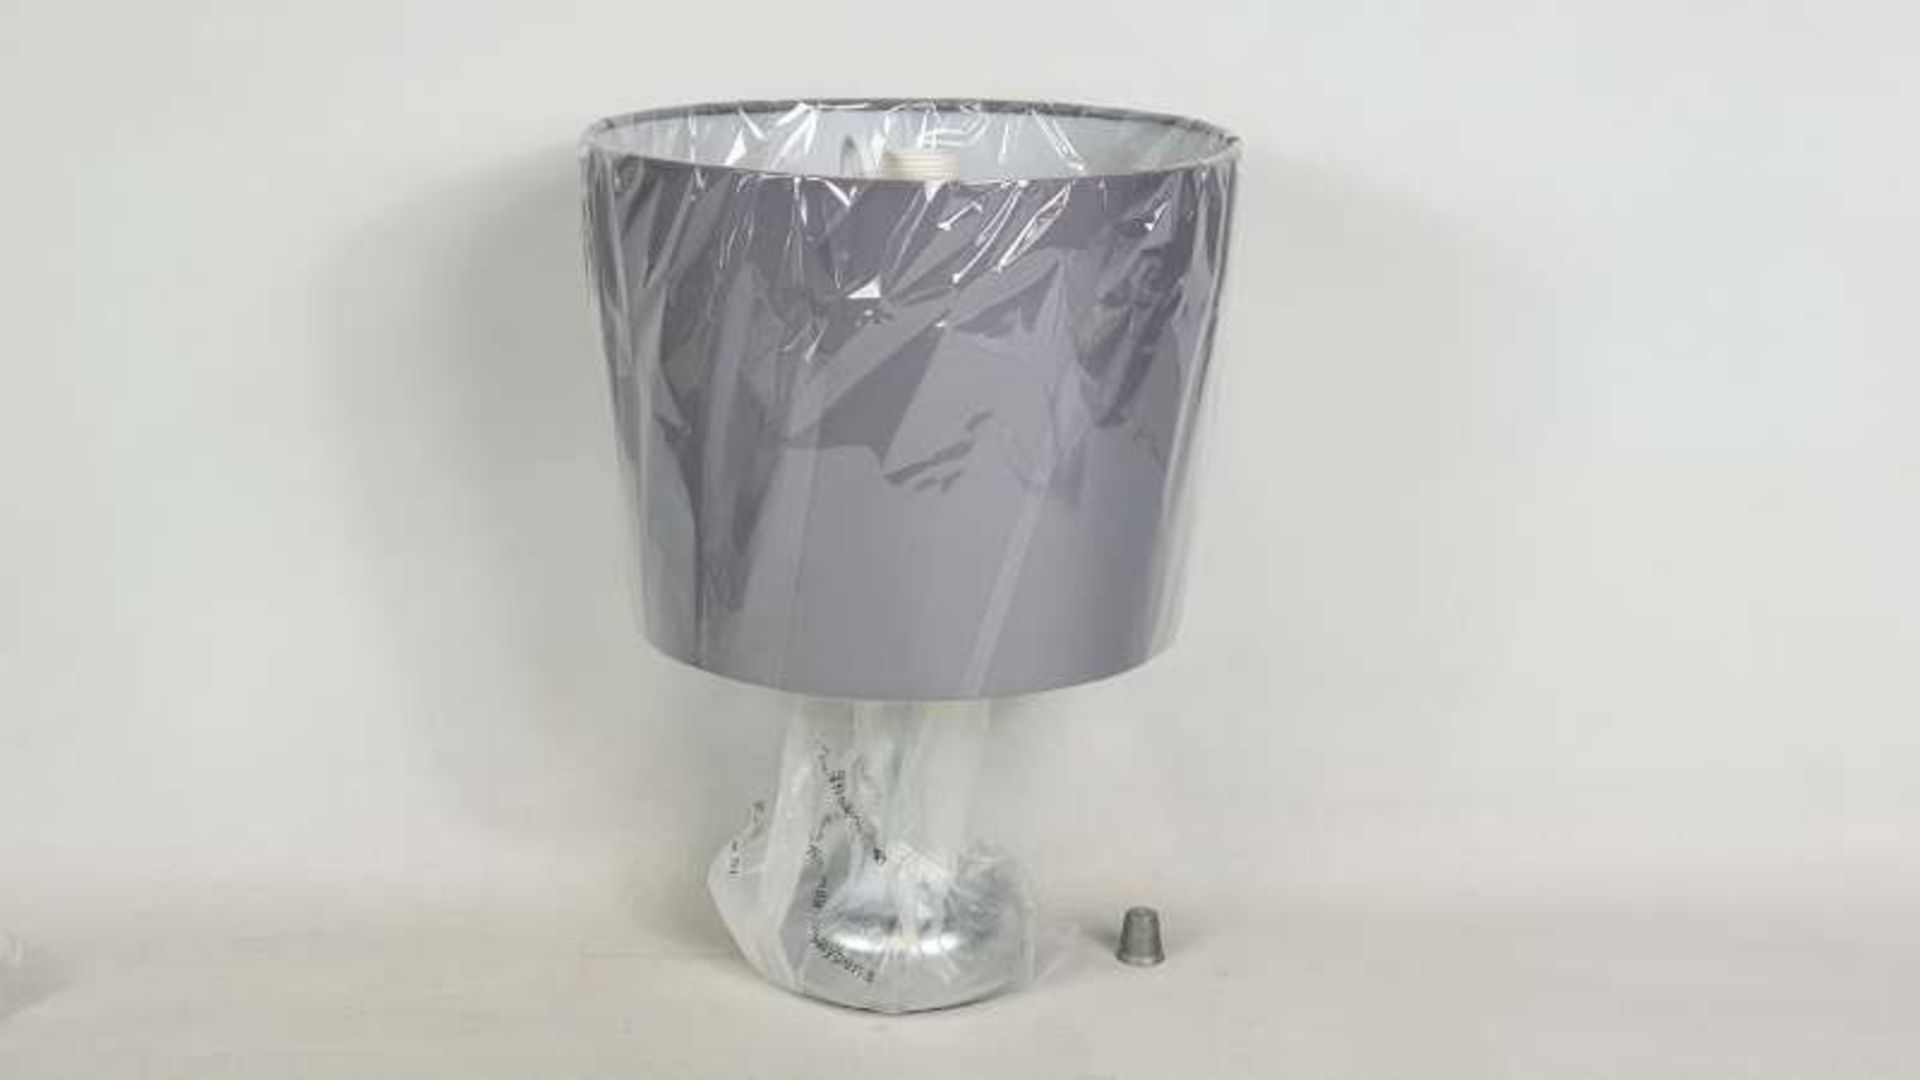 16 X BRAND NEW CRACKLE GLASS BALL TOUCH TABLE LAMPS WITH CHROME GREY SHADE IN 4 BOXES